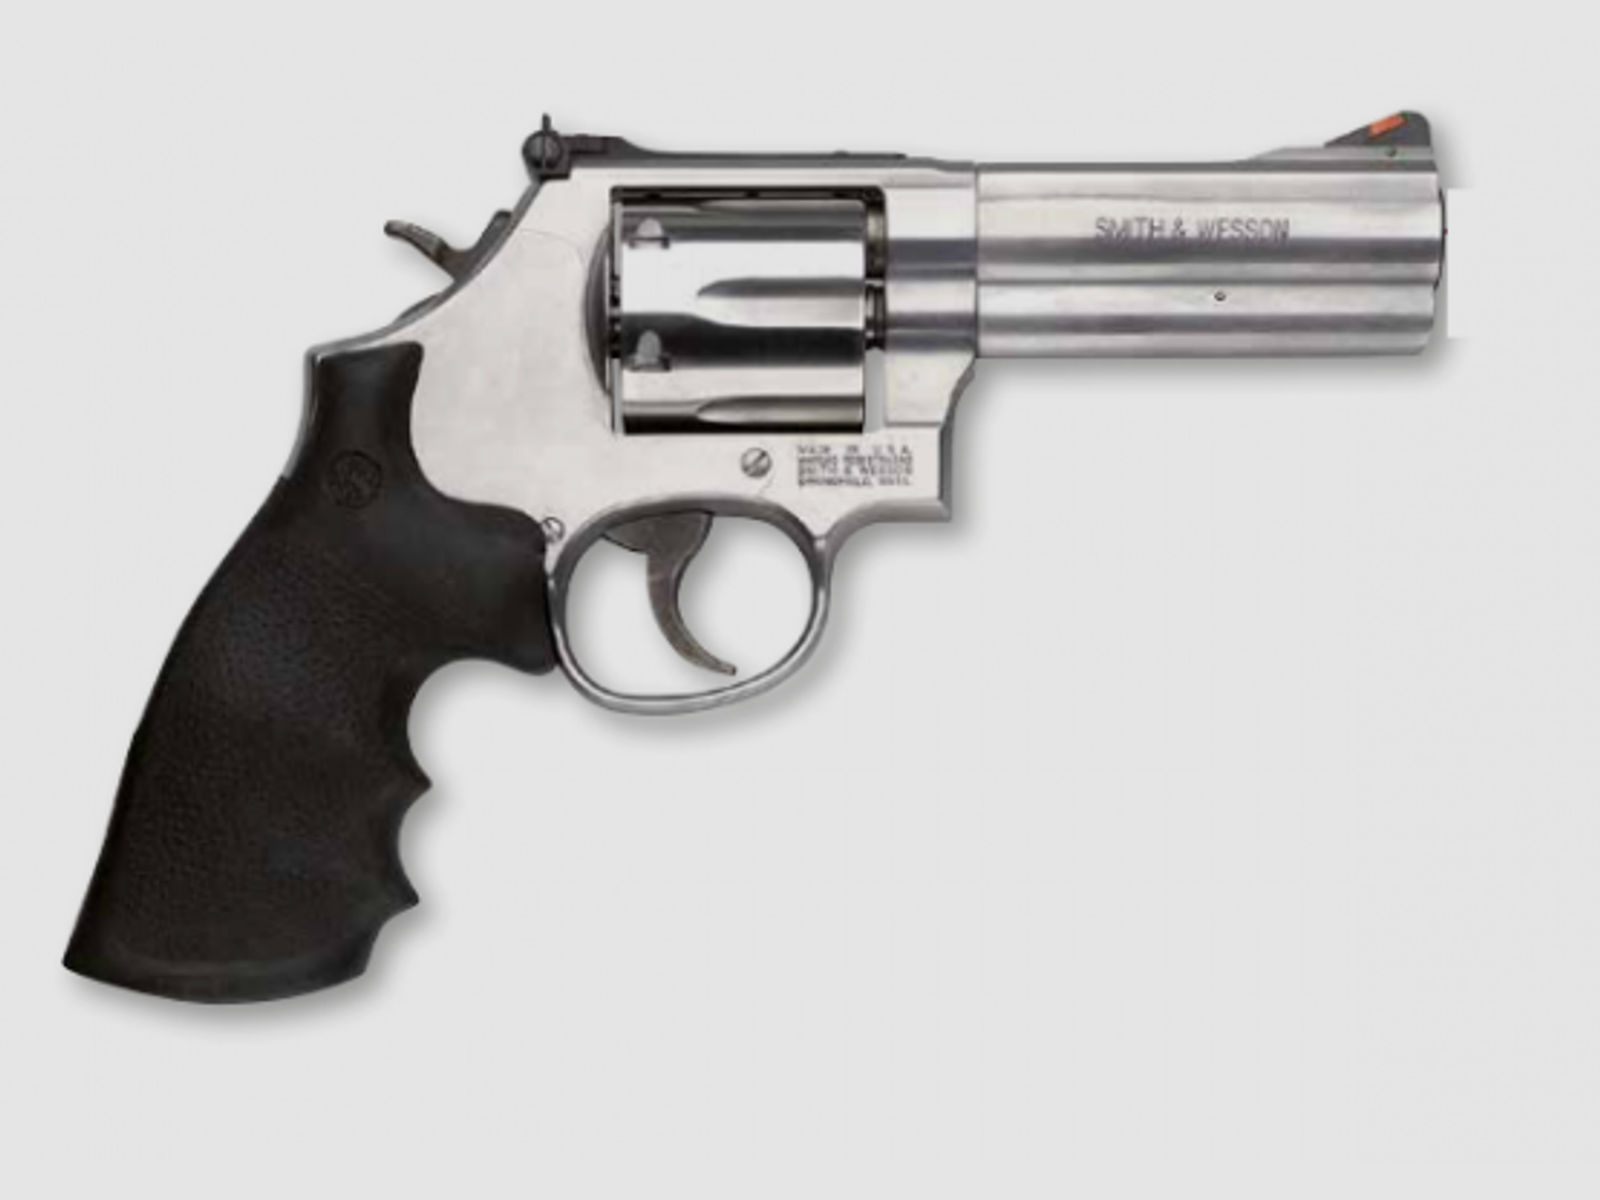 Smith & Wesson Mod. 686, 6", Balkenkorn .357Mag. stainless Revolver